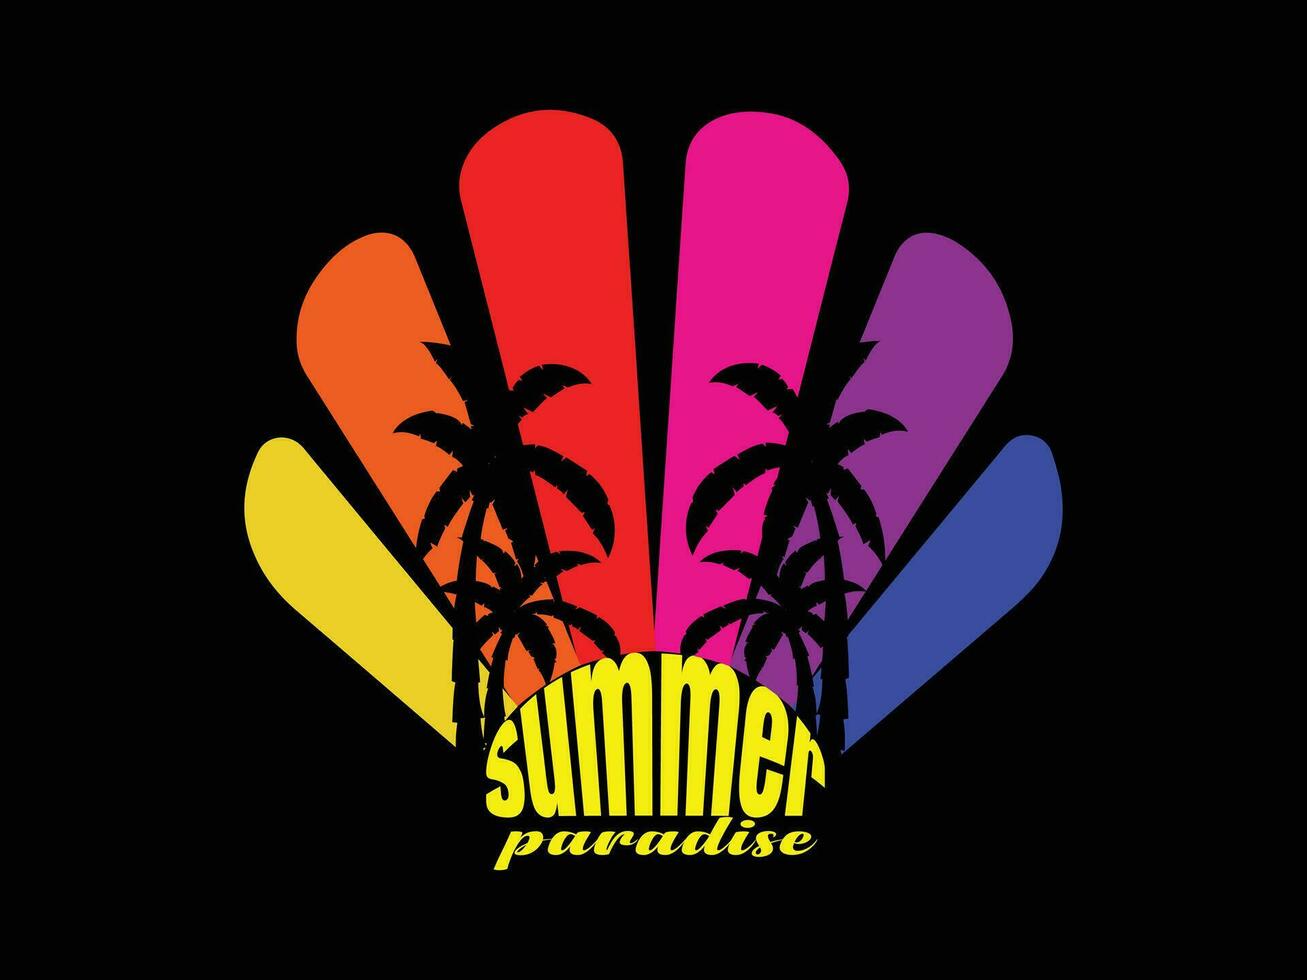 Enjoy Summer Vacations T-shirt Design Vector Illustration and apparel vector design, print, typography, poster, emblem with palm trees. With Surfing Man, Vector Print Design Artwork, Summer T-shirt